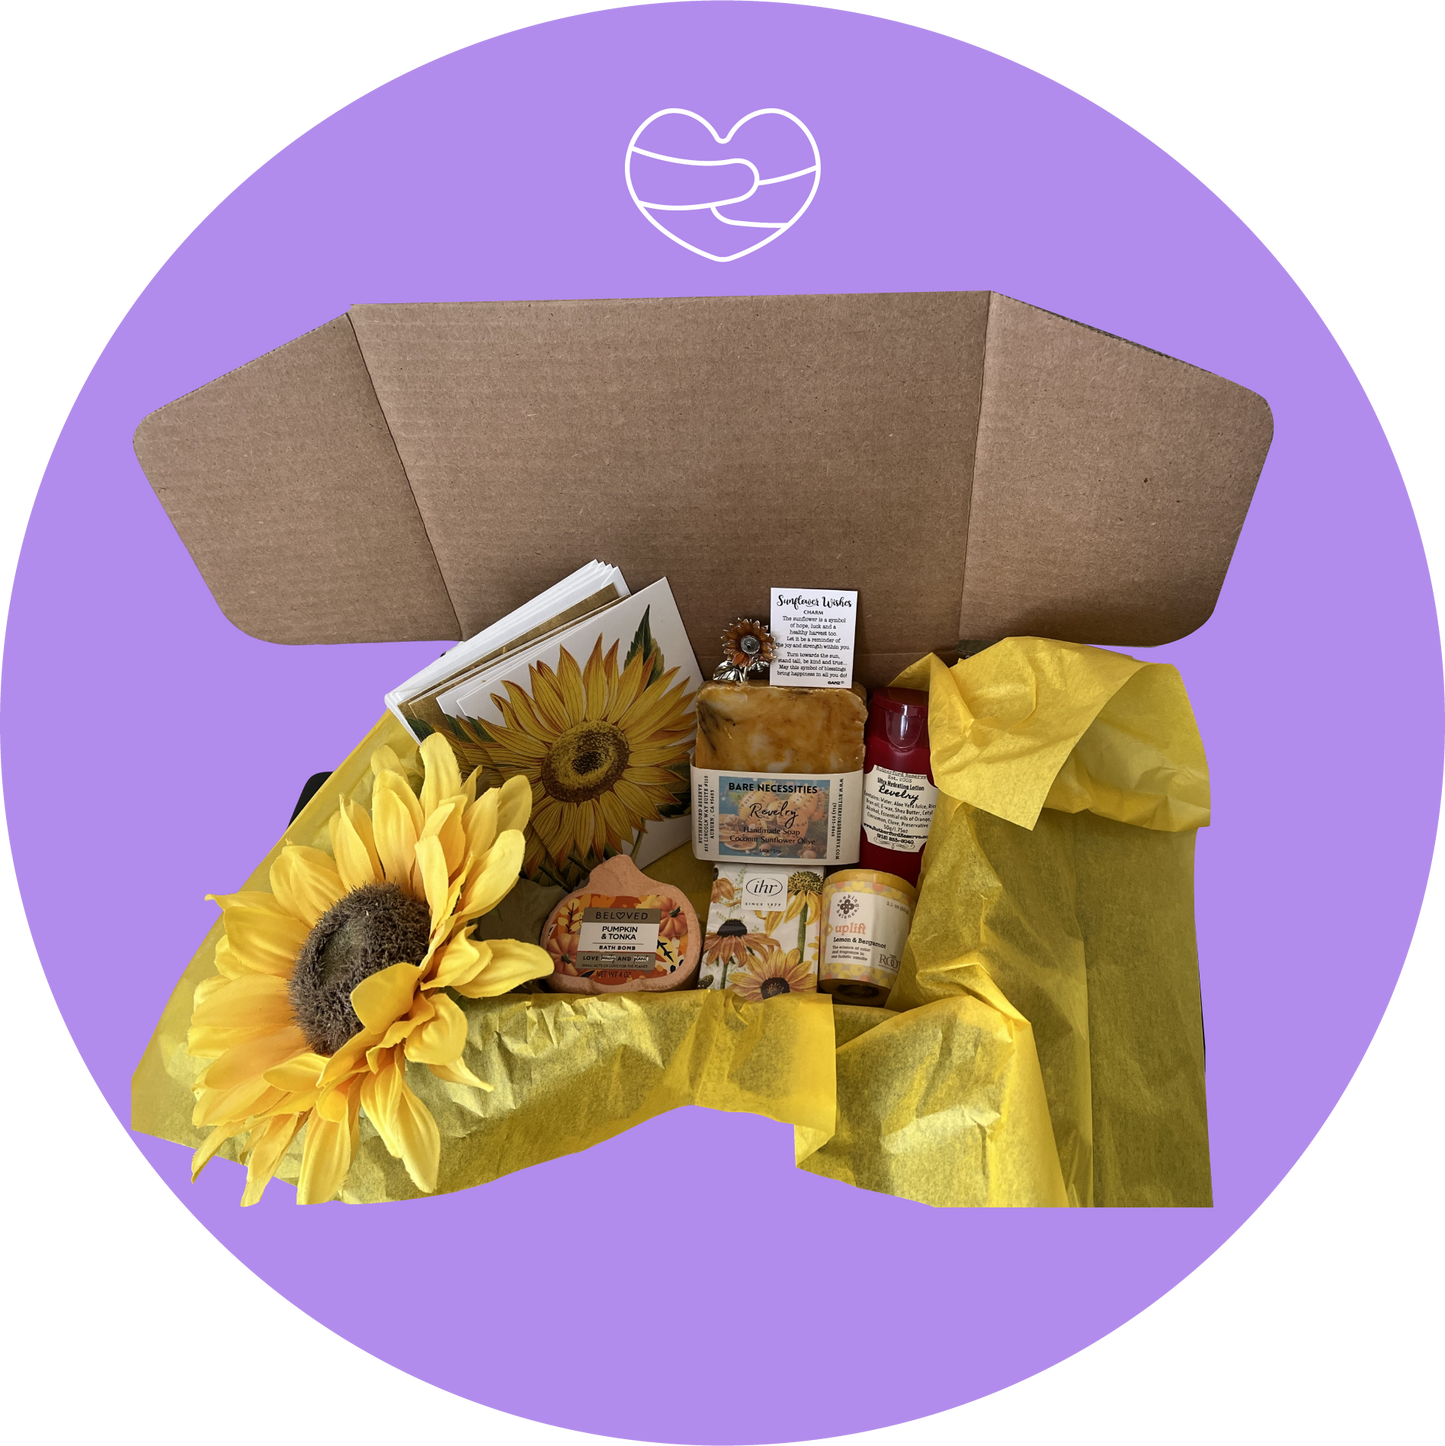 EDLINKS® Hug-In-A-Box, Month-By-Month Subscription